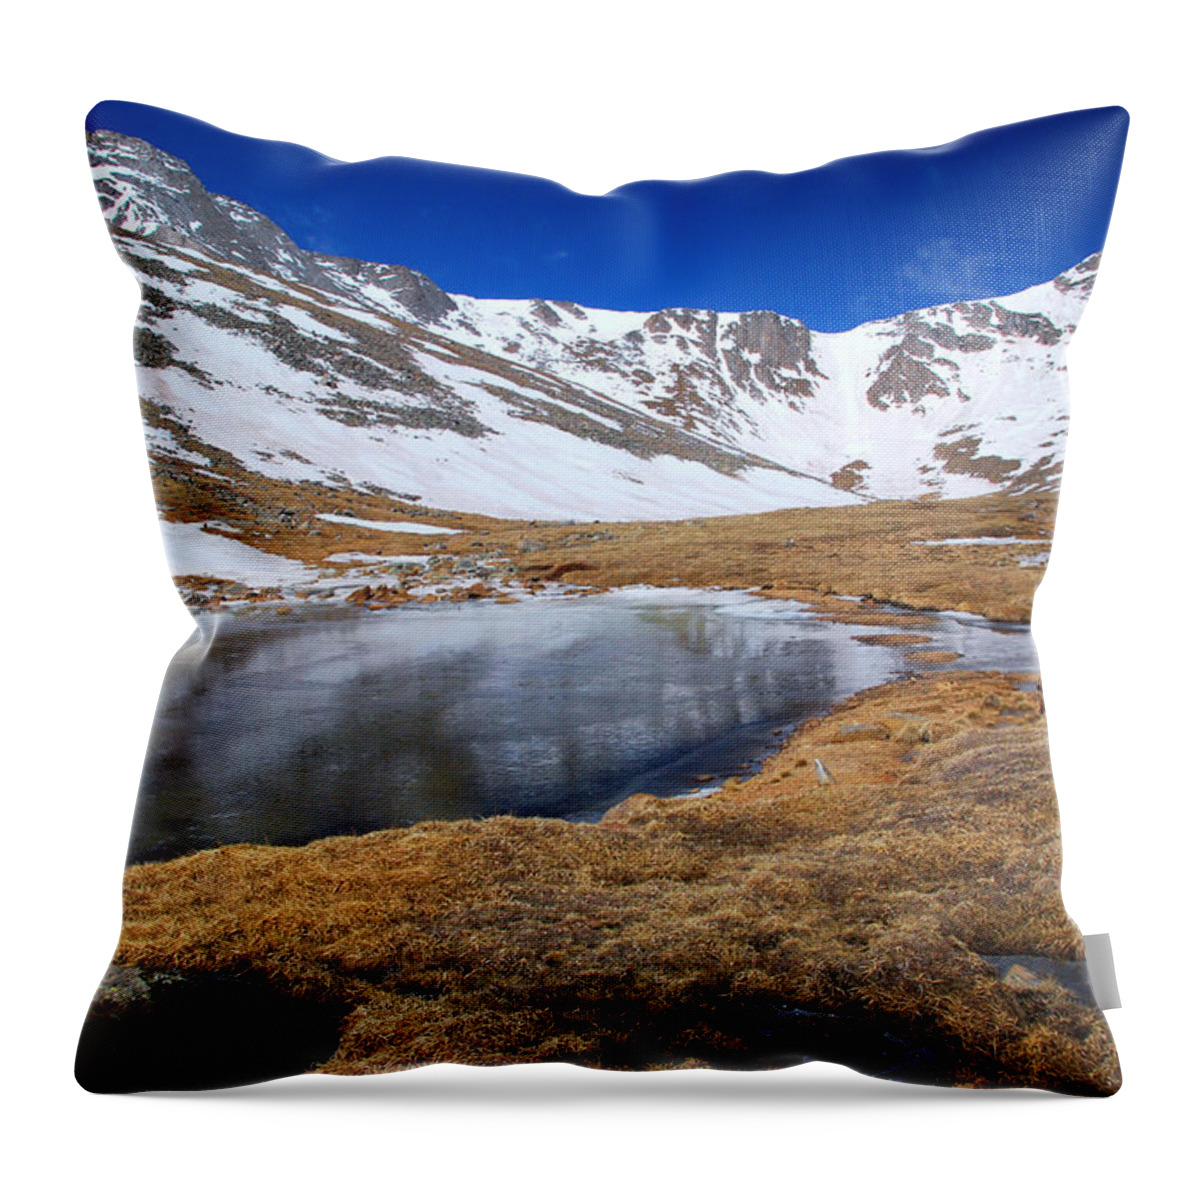 Mount Evans Throw Pillow featuring the photograph Mount Evans by Cascade Colors